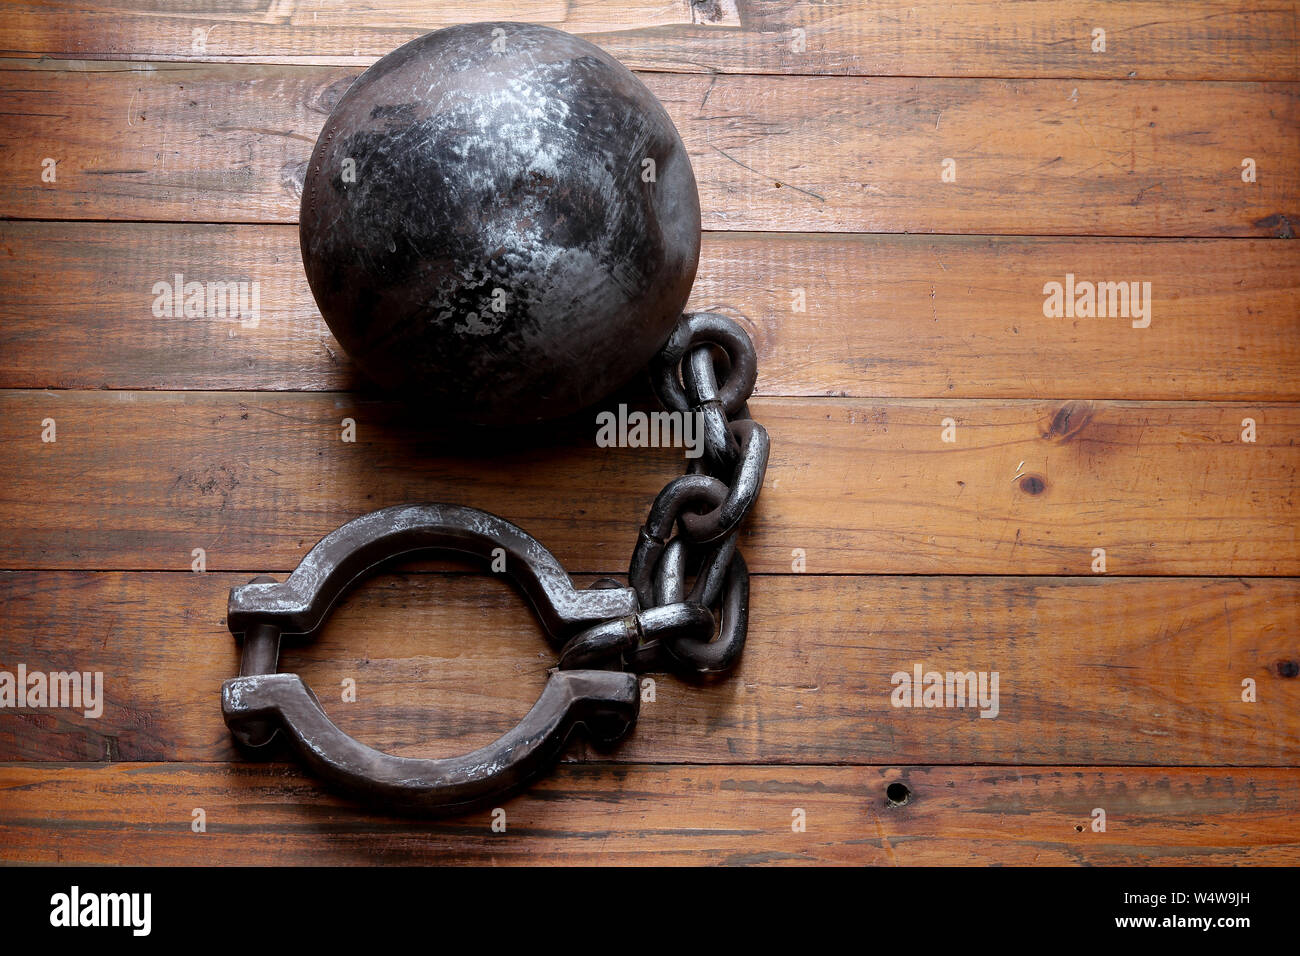 Prison Shackle on Wooden Background Stock Photo